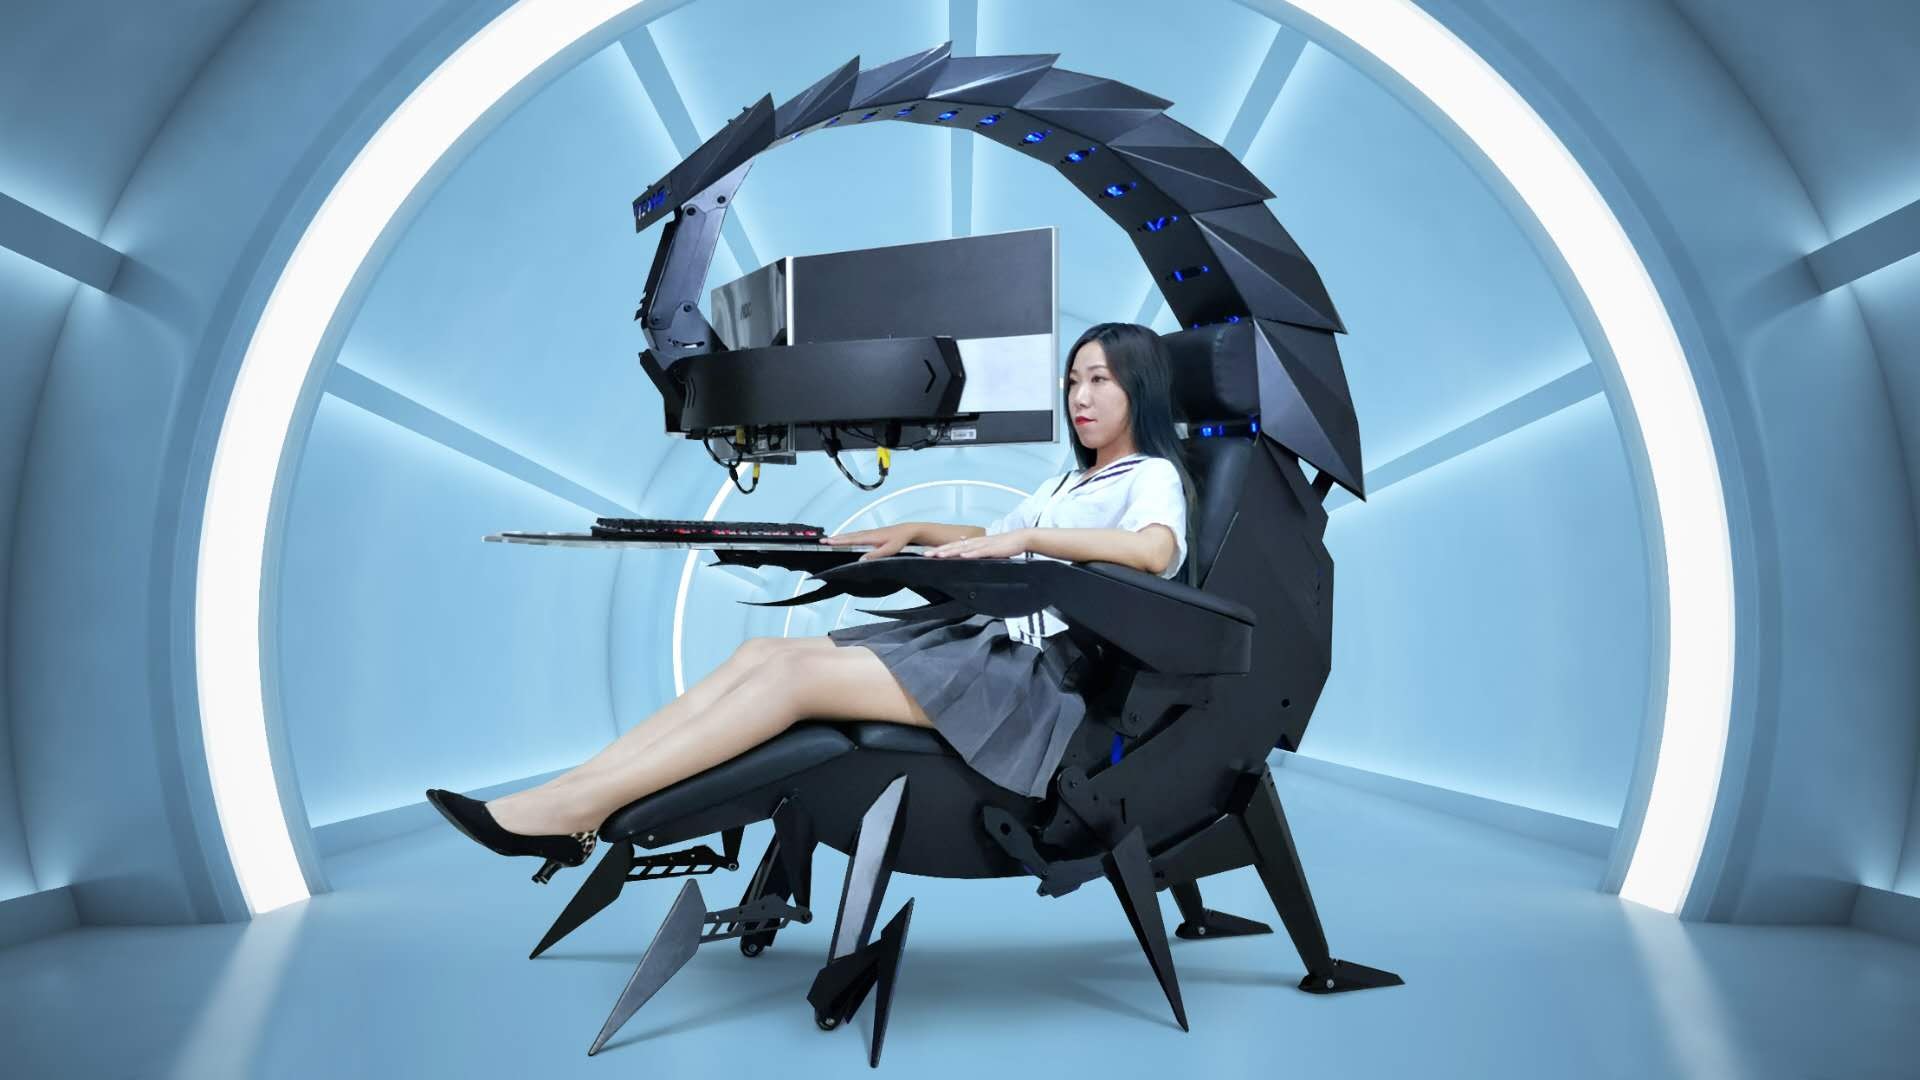 This Insane Motorized Scorpion Computer Chair Is Perfect For Work From Home Supervillains Videos Soranews24 Japan News